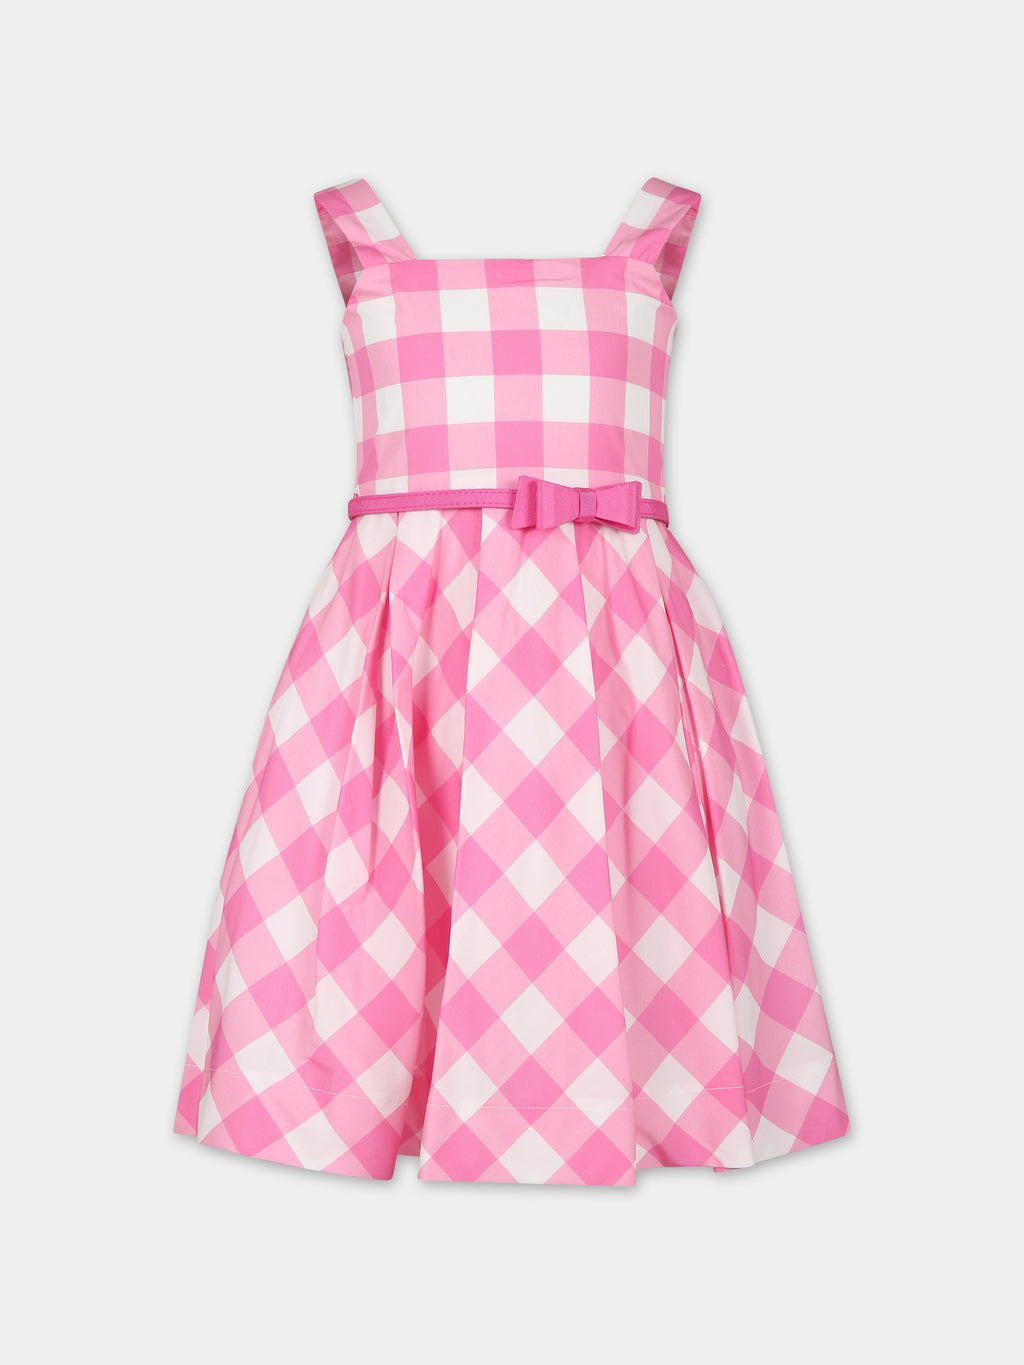 Pink dress for girl with bow and vichy print